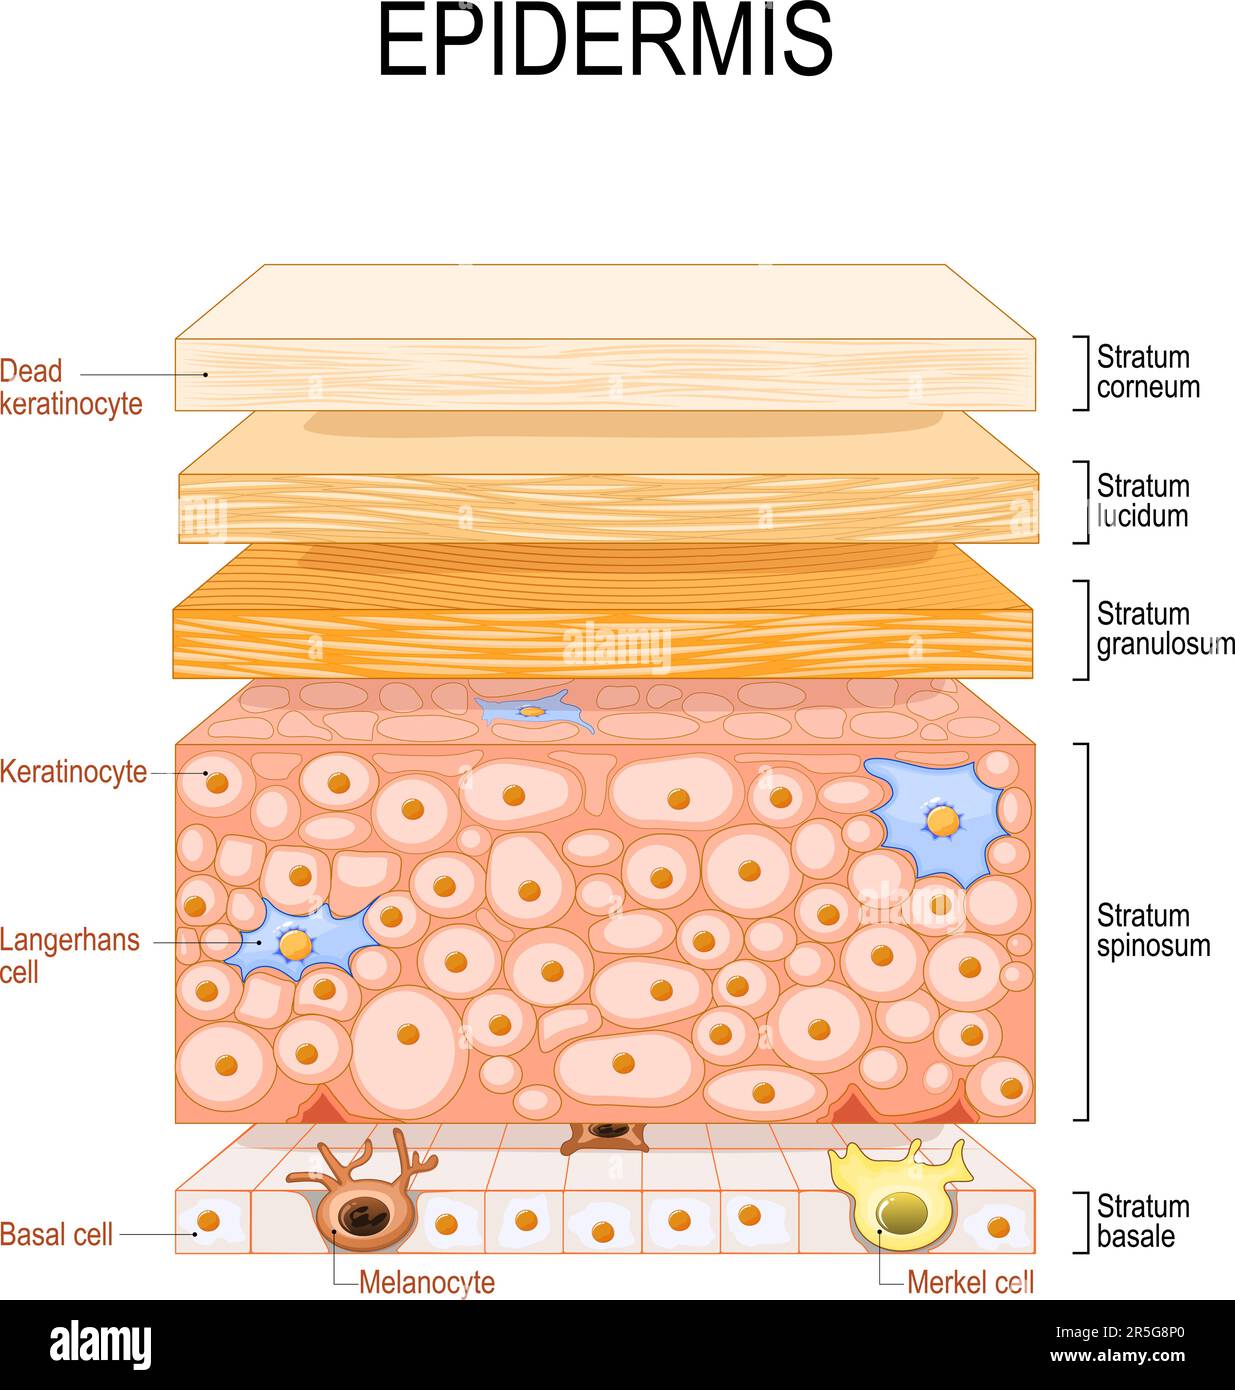 epidermis structure. Skin anatomy. Cell, and layers of a human skin. Cross section of the epidermis. Skin care. vector illustration. Stock Vector